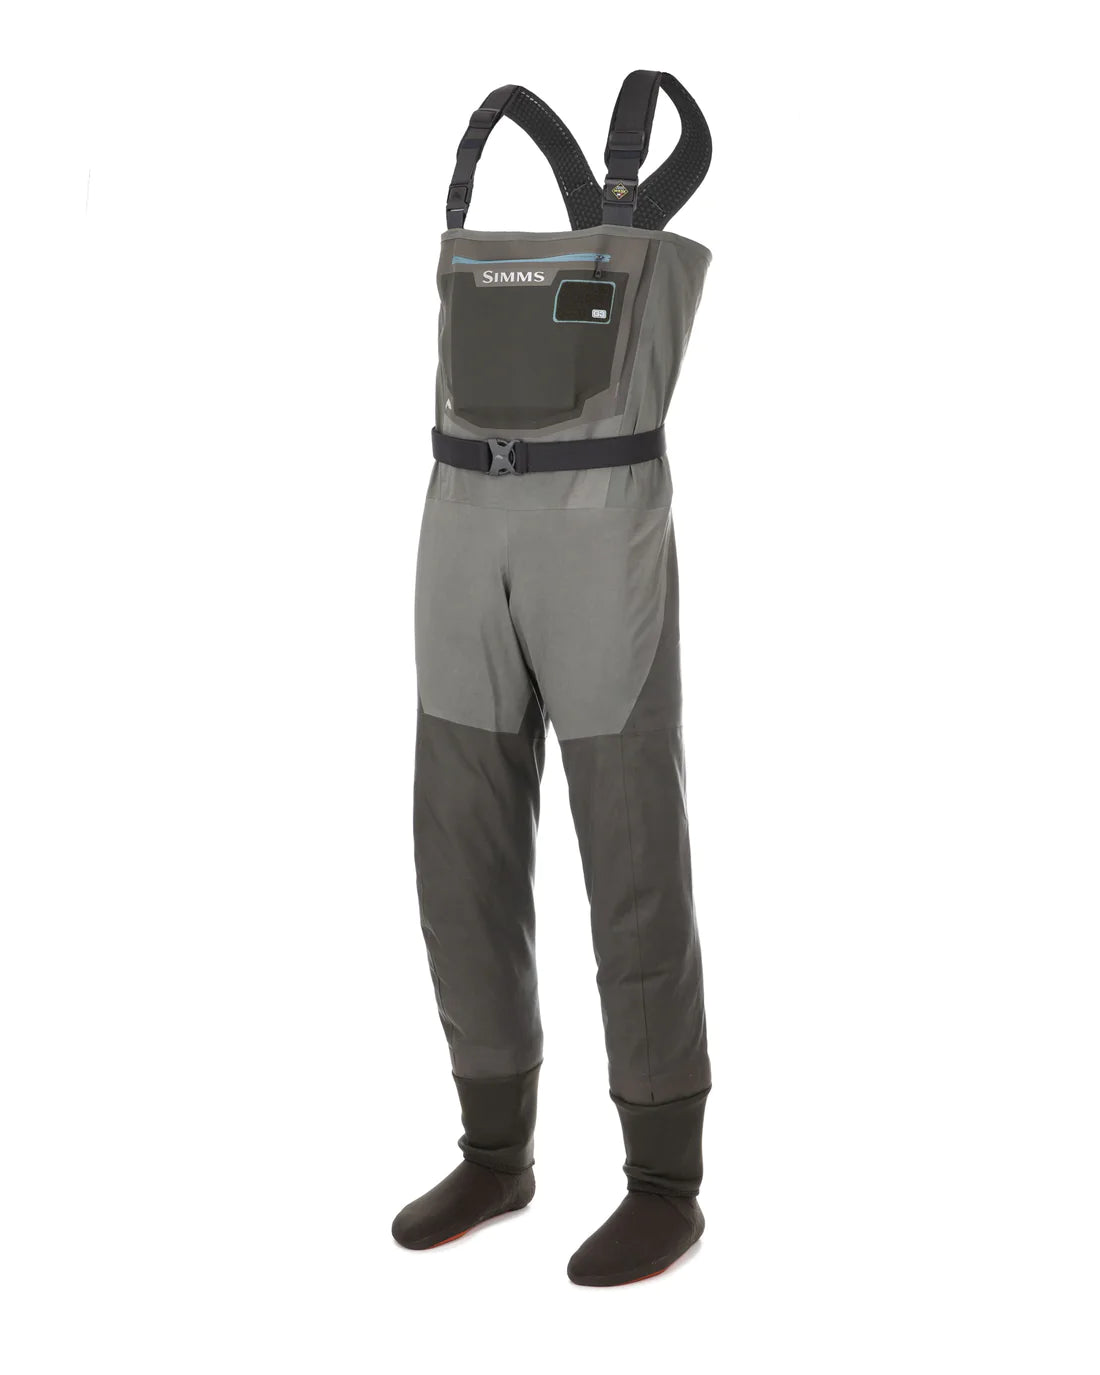 Patagonia Women's Swiftcurrent™ Waders